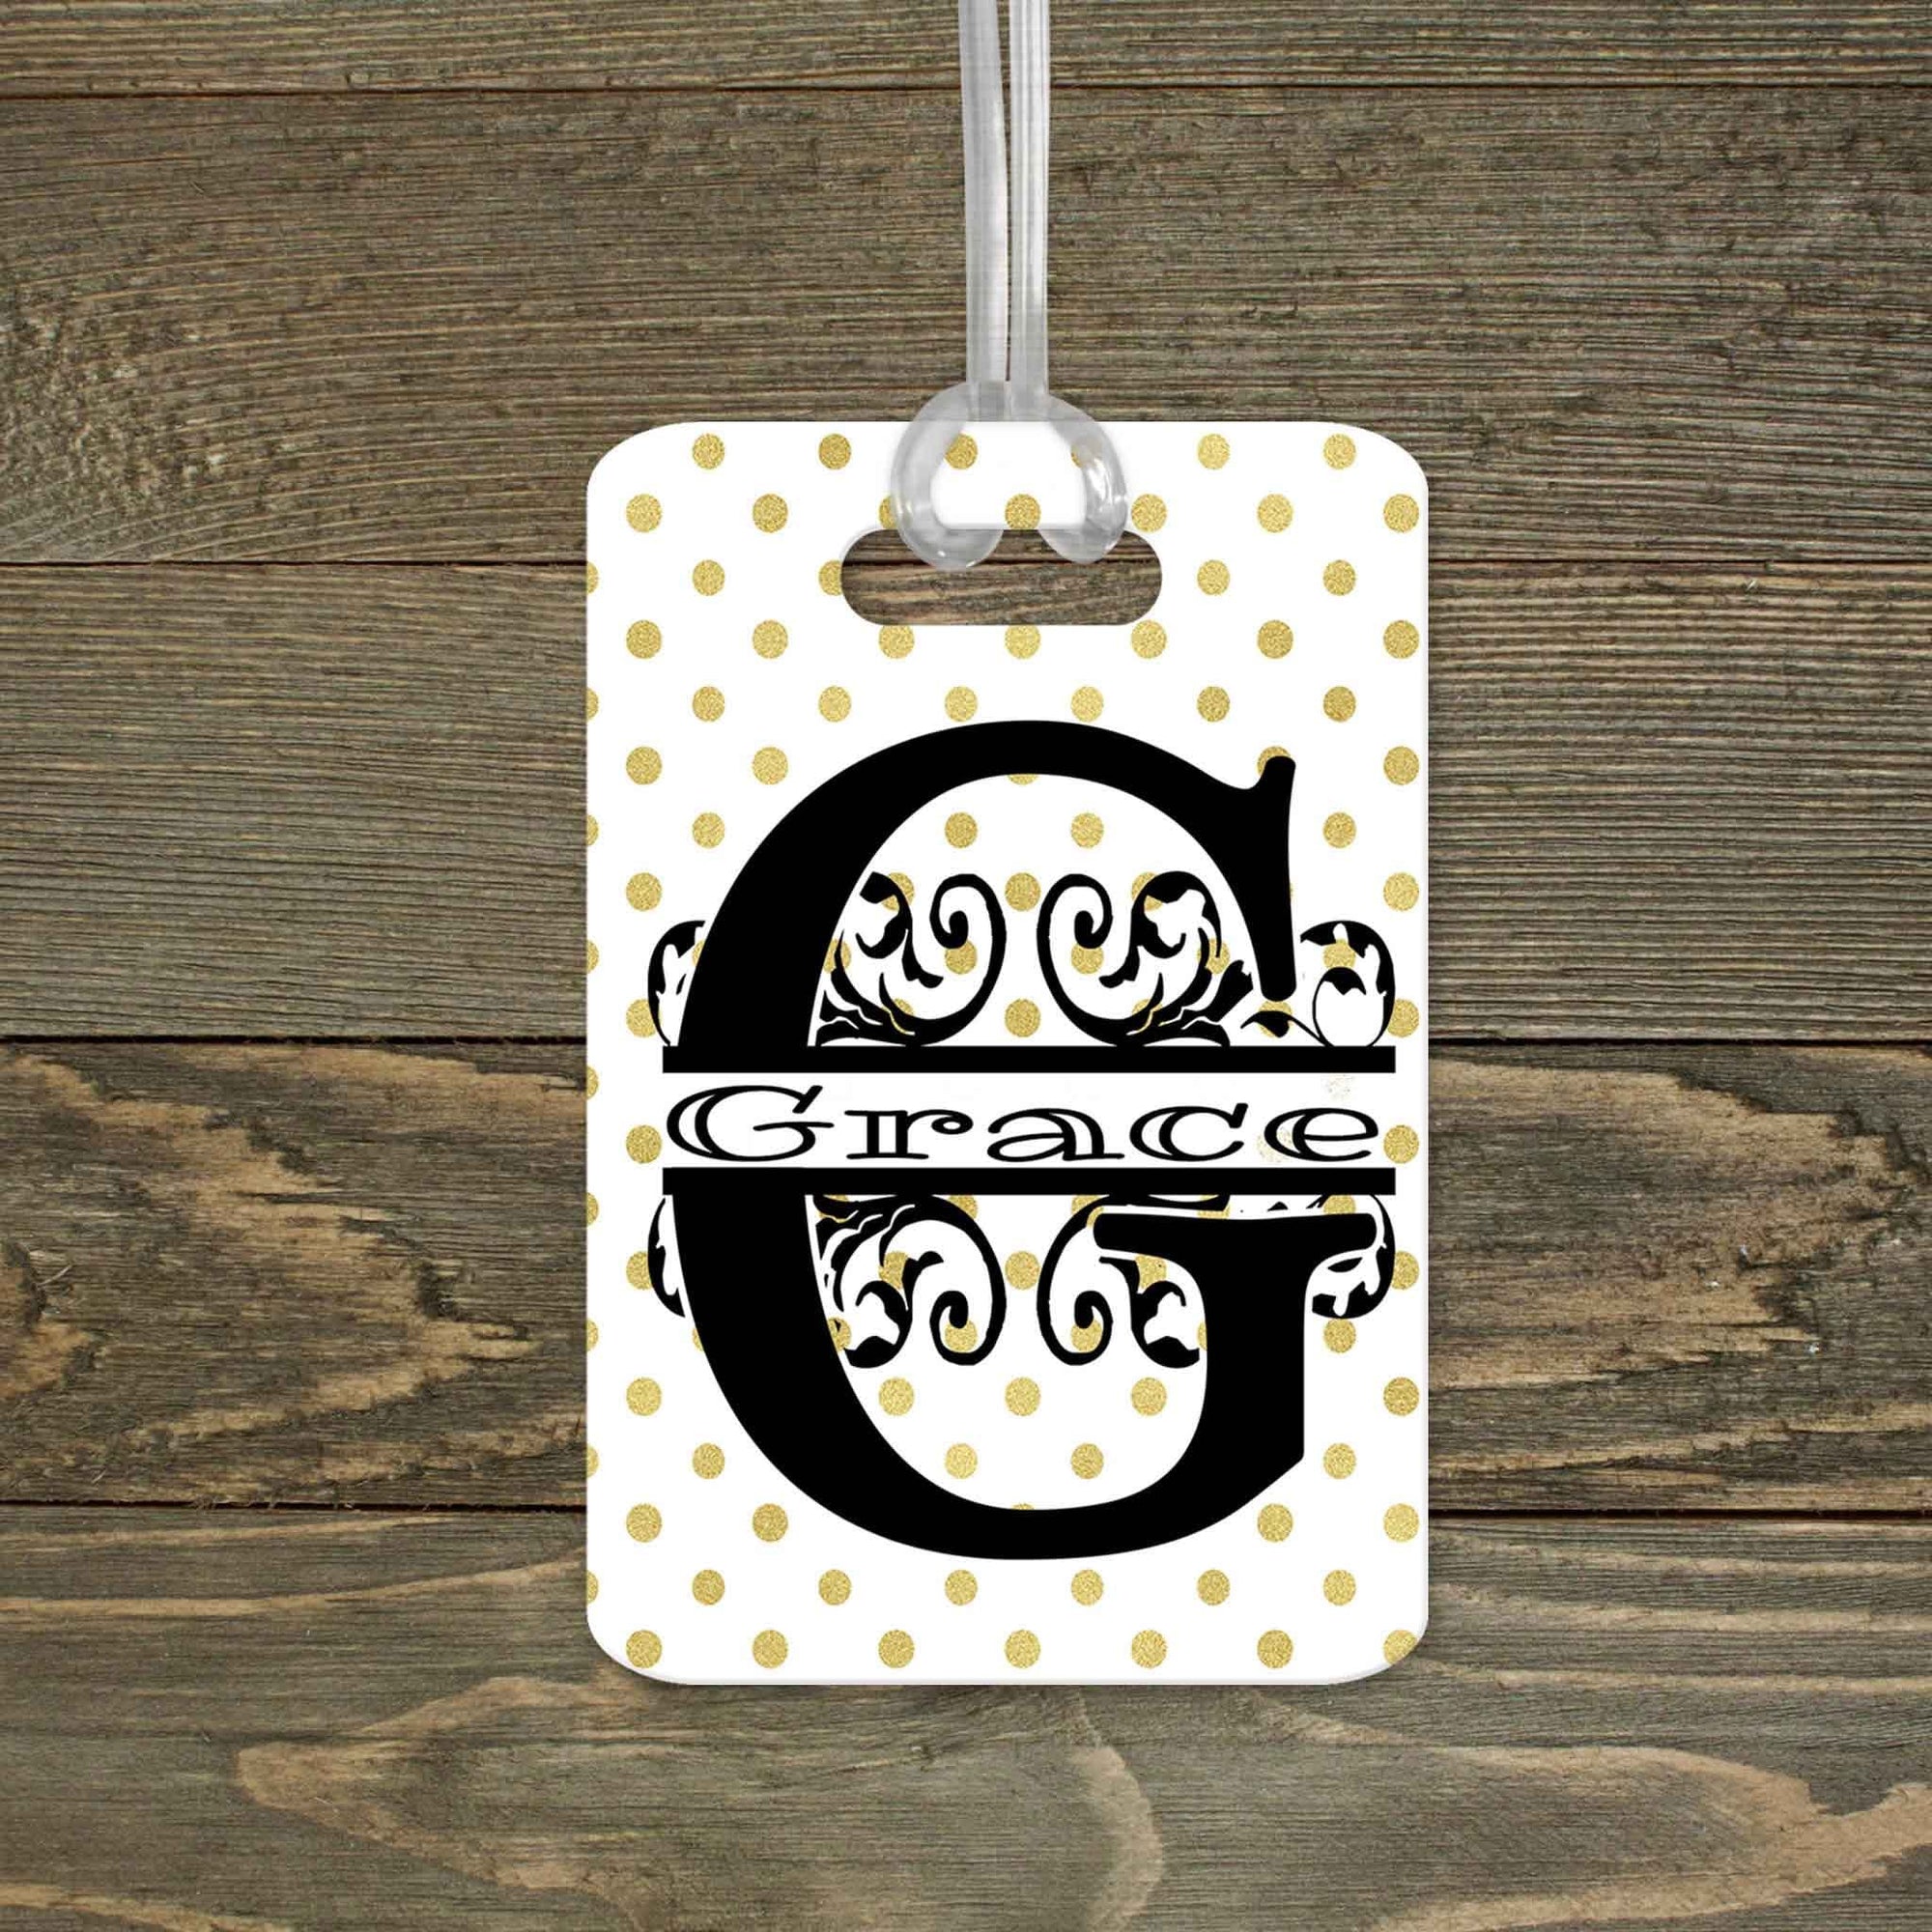 This & That Solutions - Personalized Luggage Tag | Custom Monogram Bag Tag | Gold Polka Dot - Personalized Gifts & Custom Home Decor